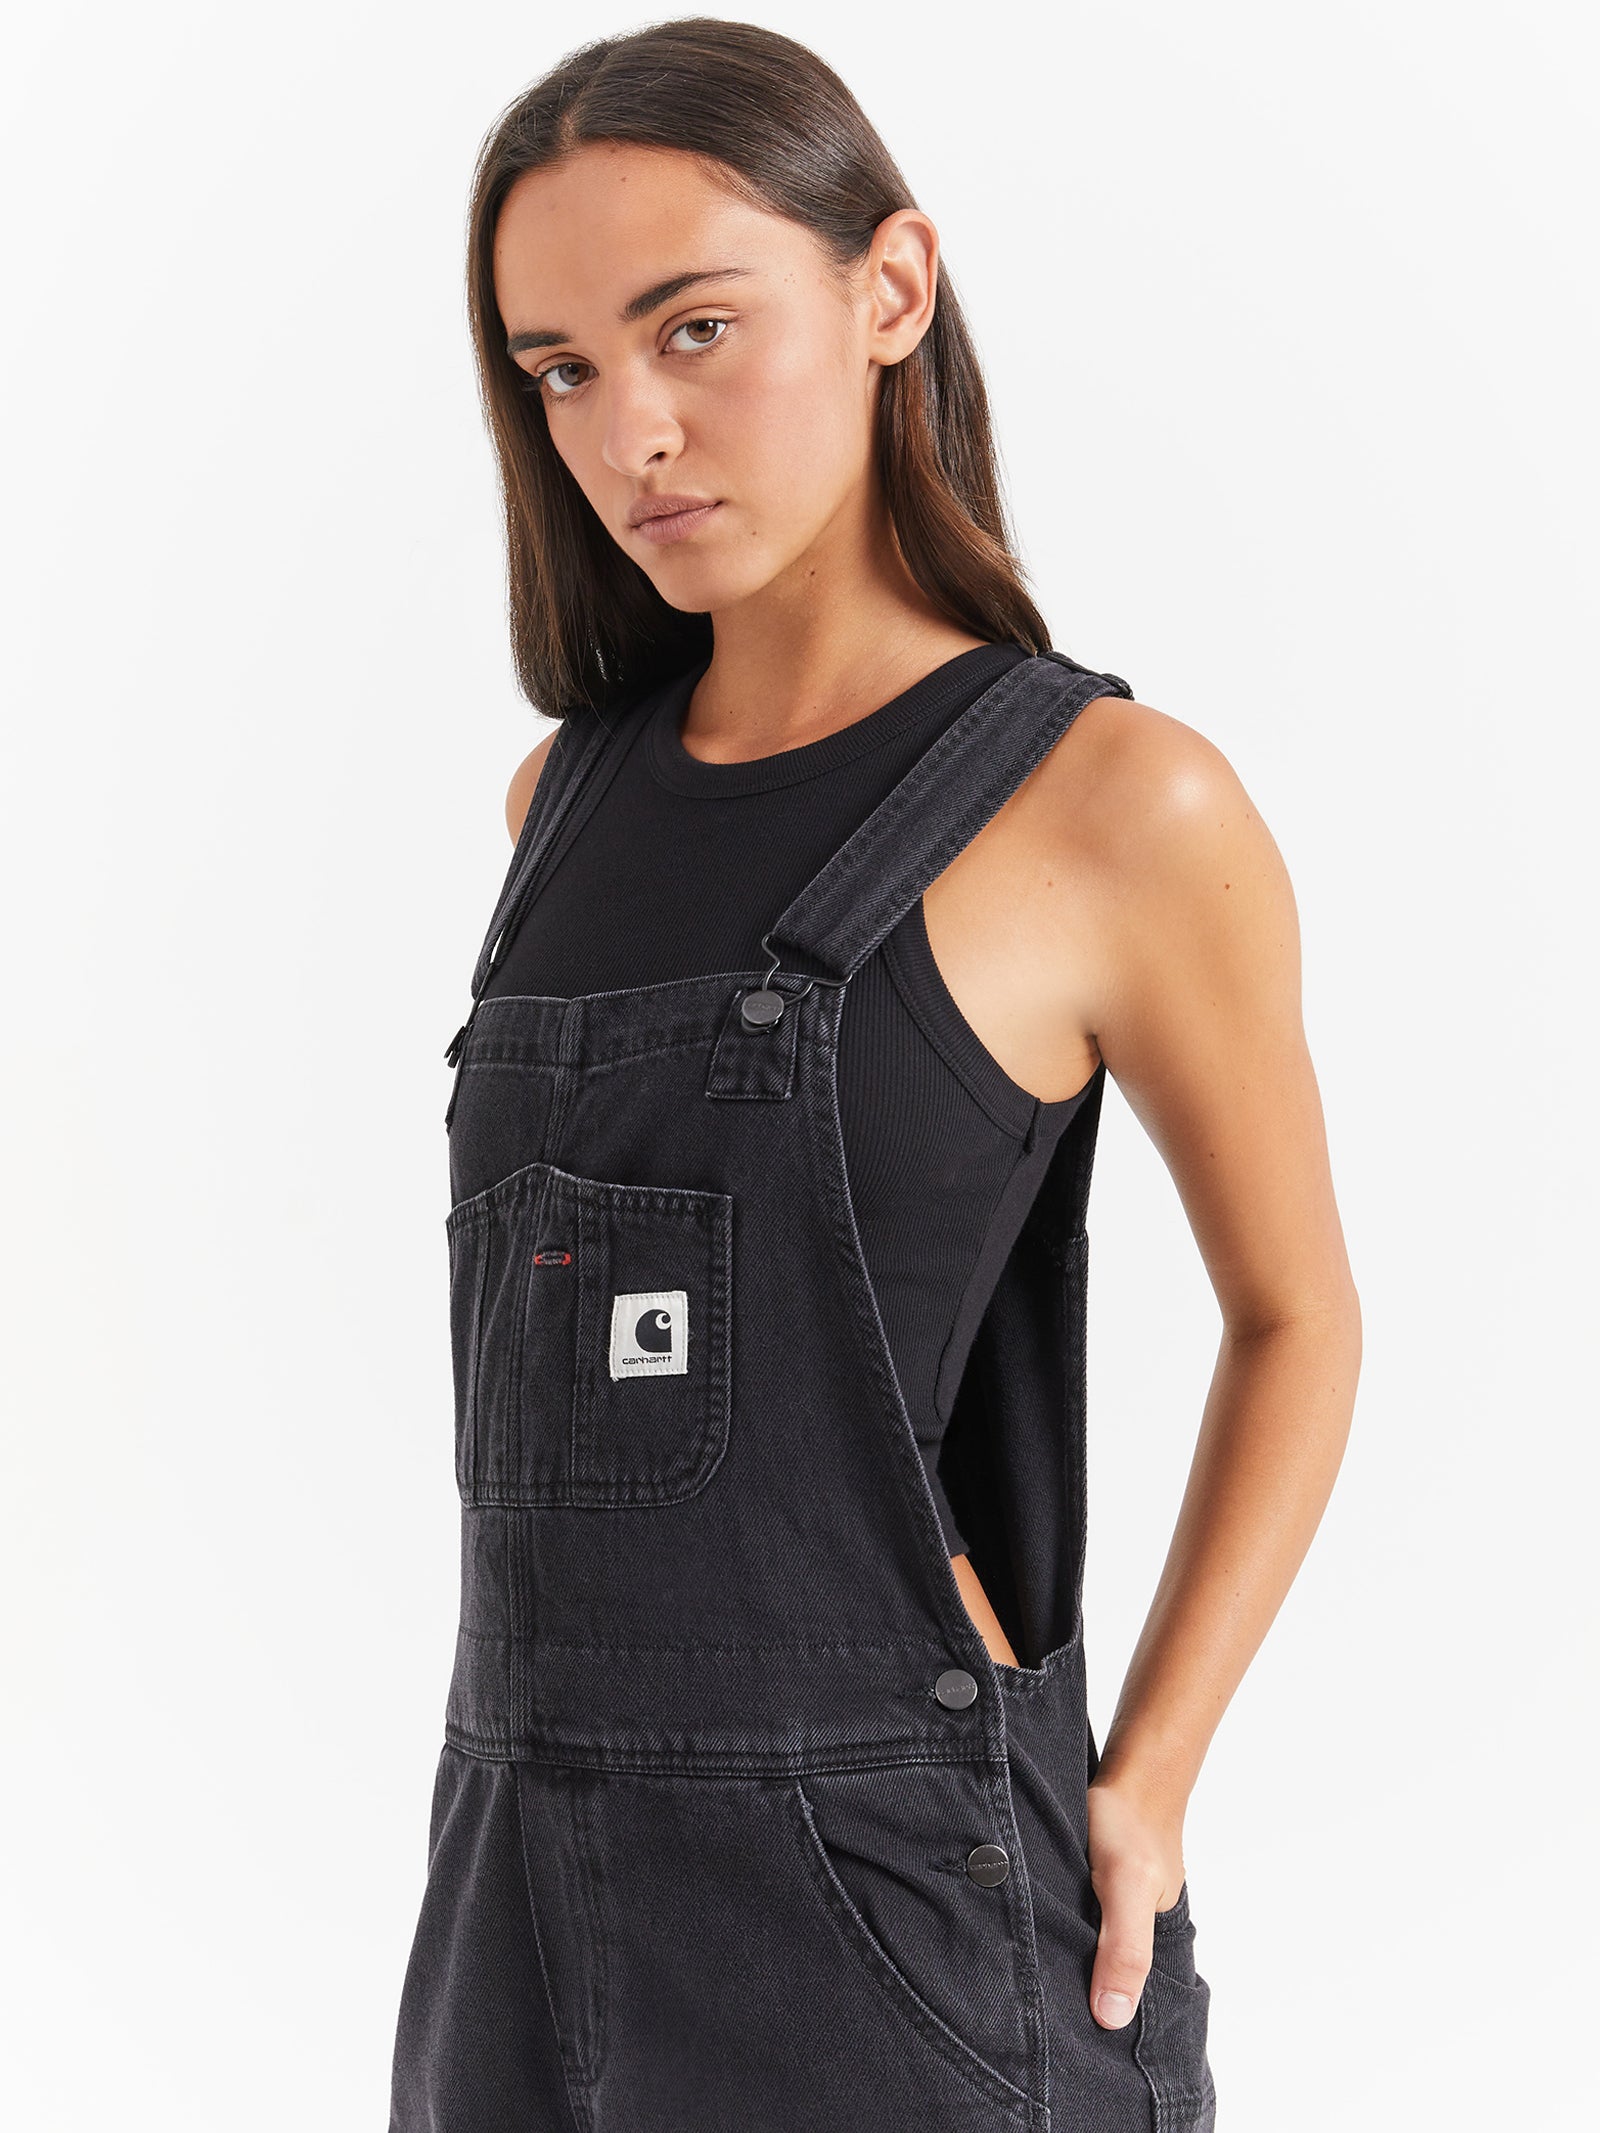 Carhartt WIP Bib Overall Dungarees With Front Logo in Black